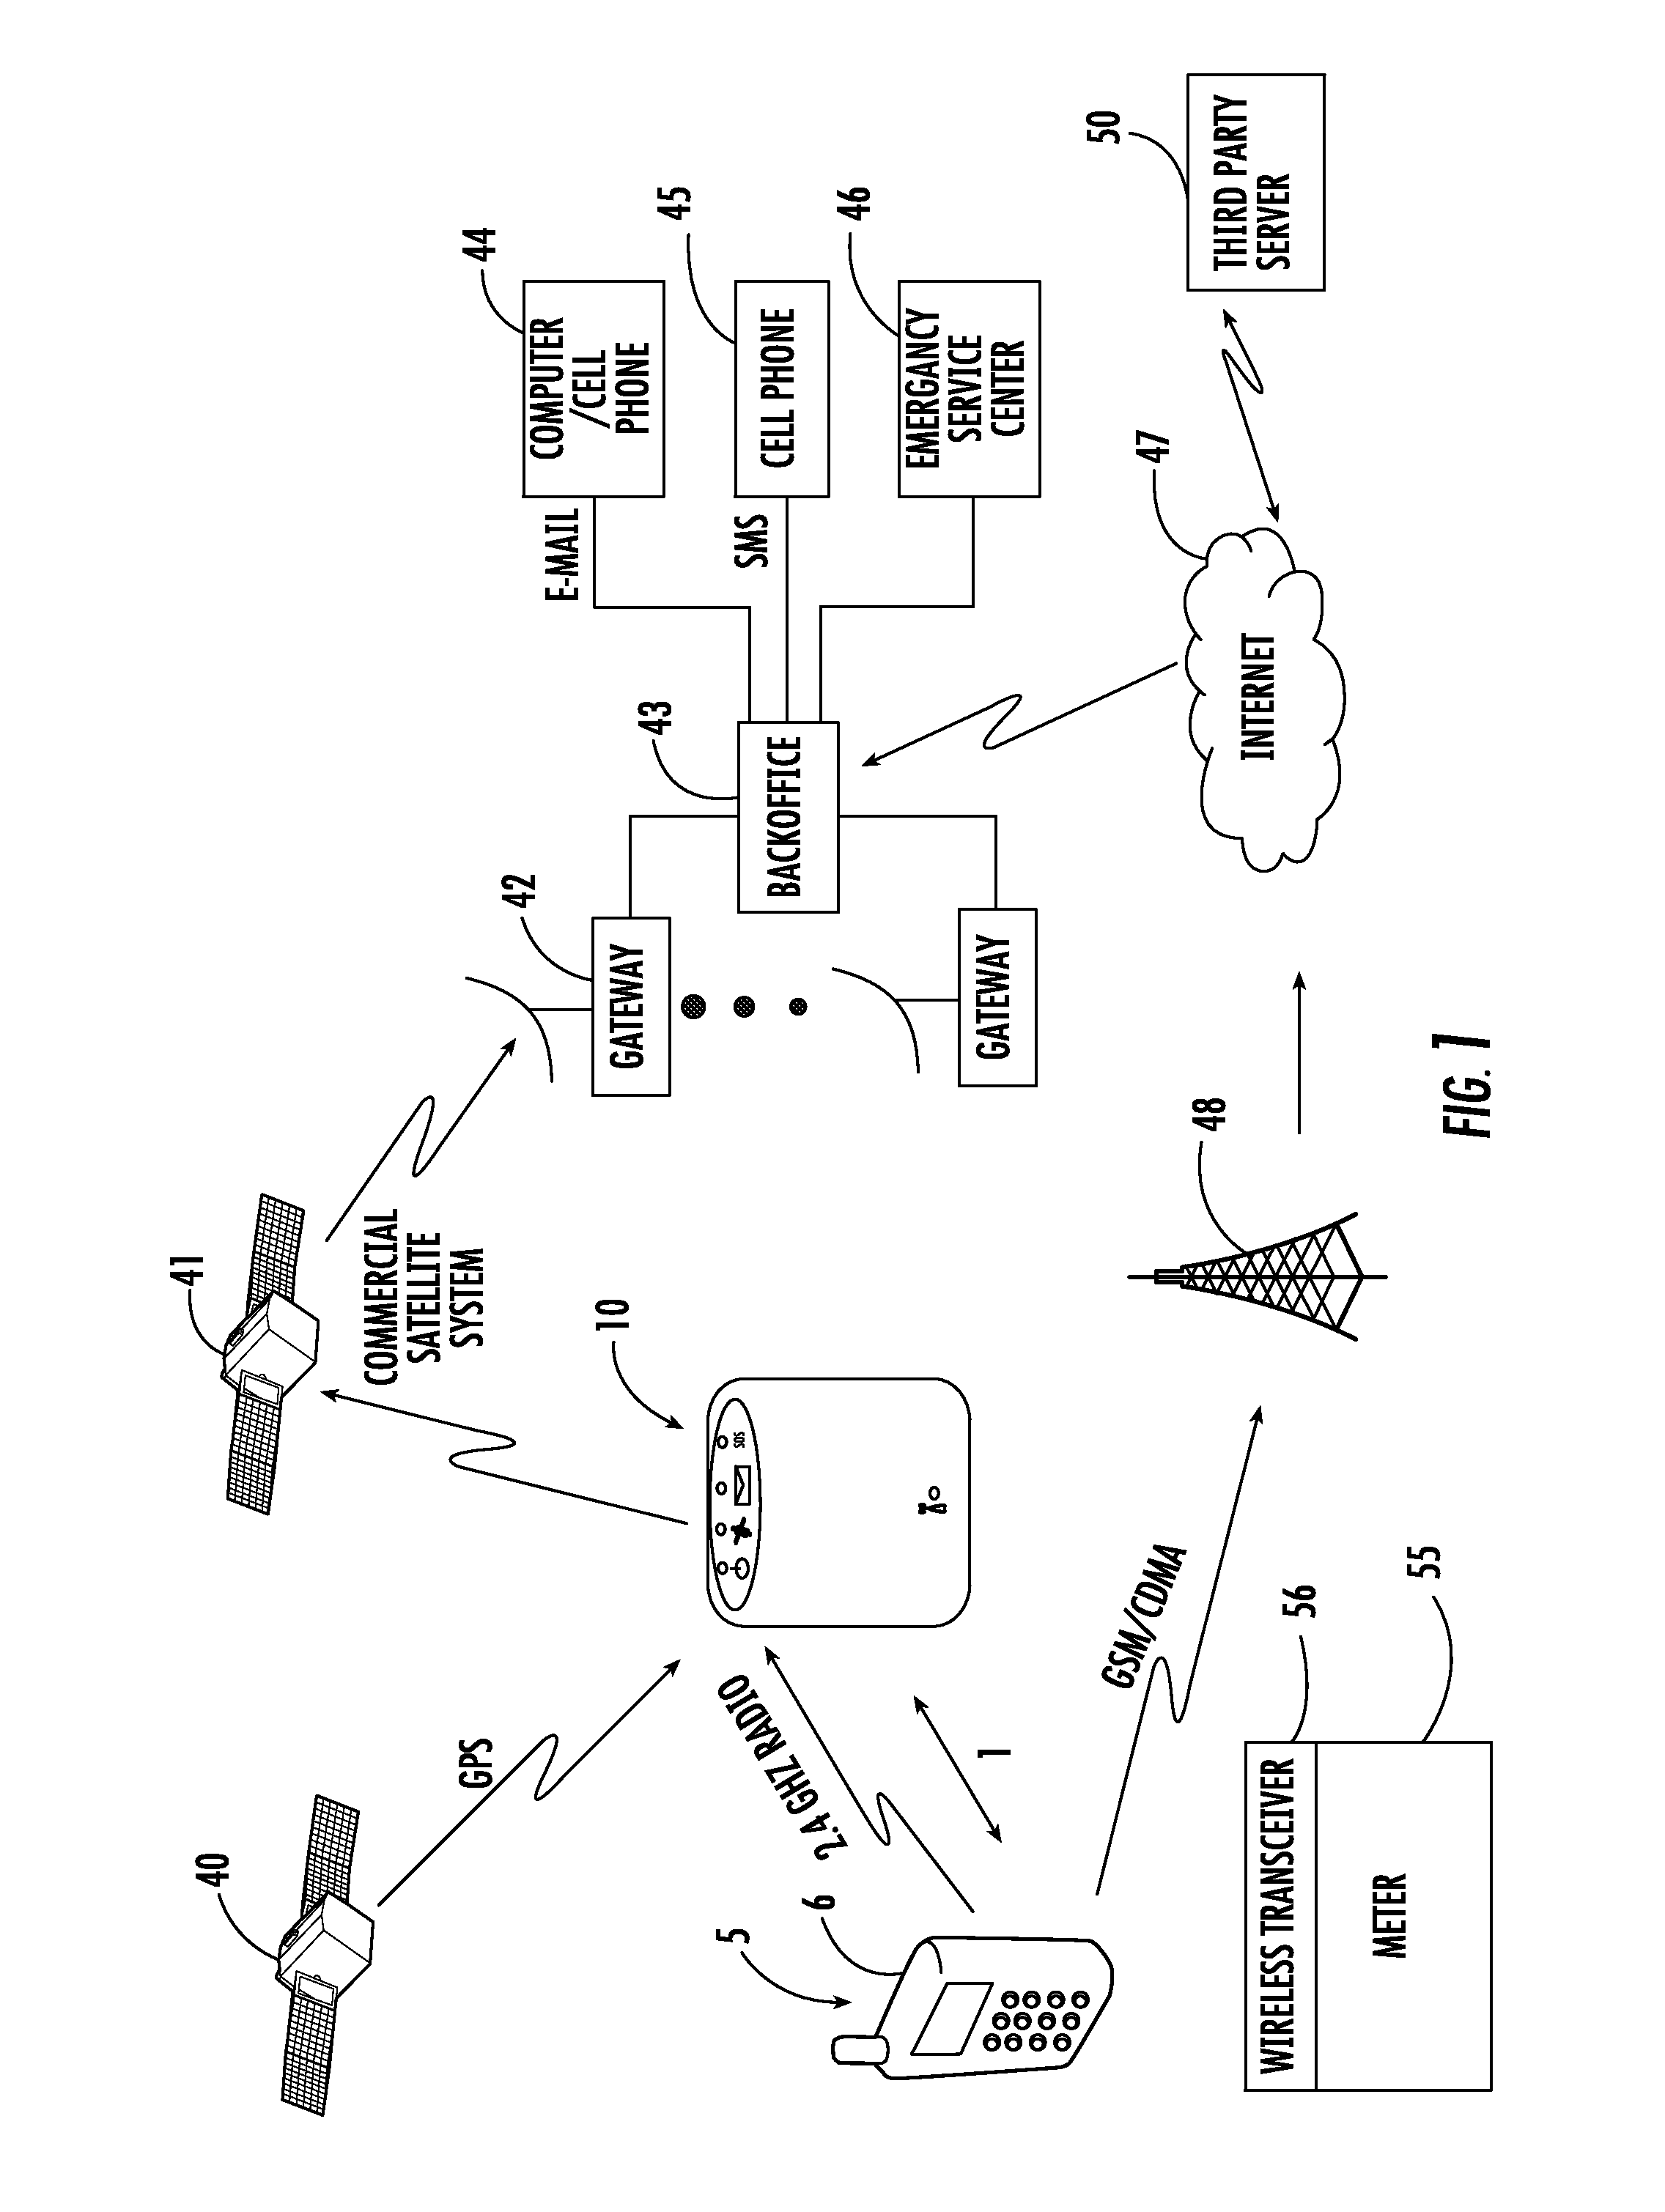 Method and apparatus for transmitting message from short-range wireless device over a satellite network